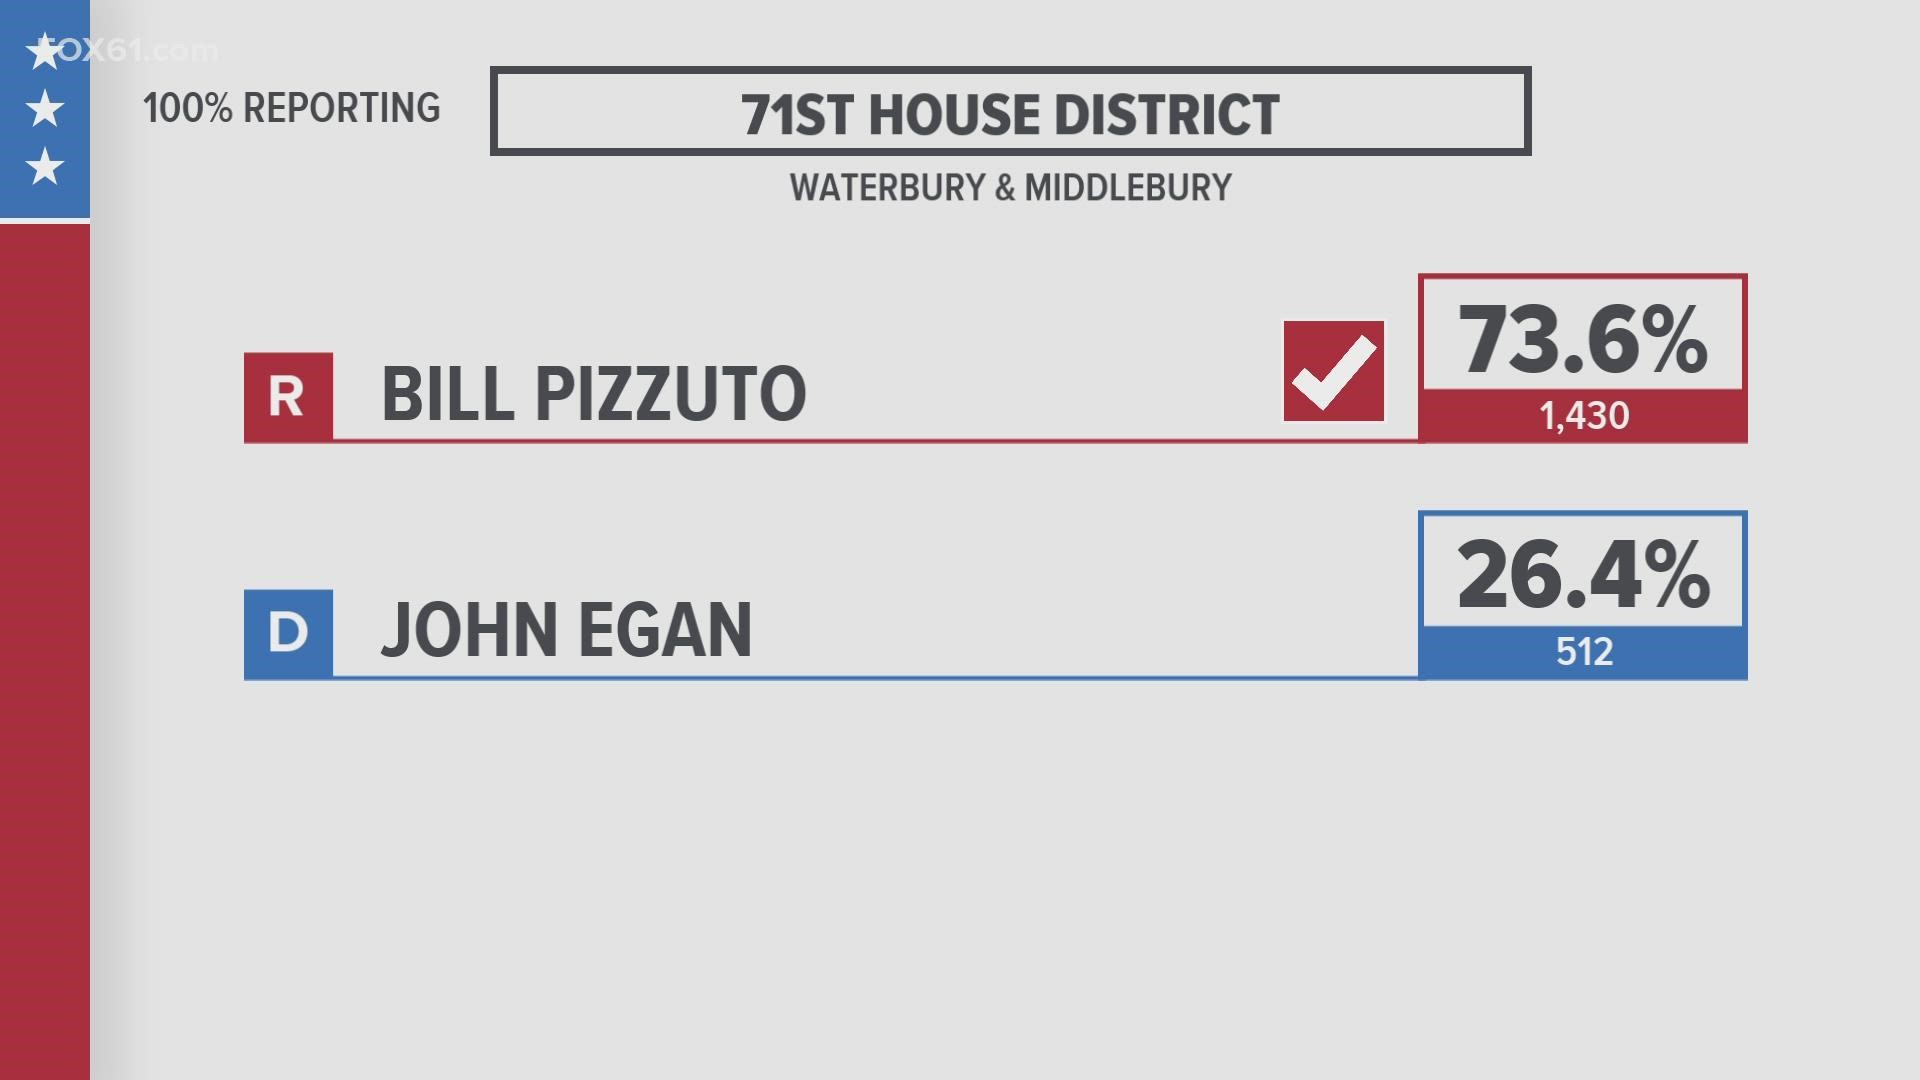 William Pizzuto (R) won the ballot in both towns to fill the vacancy with a total of 1,430 votes against Democrat John Egan's 512 total votes.